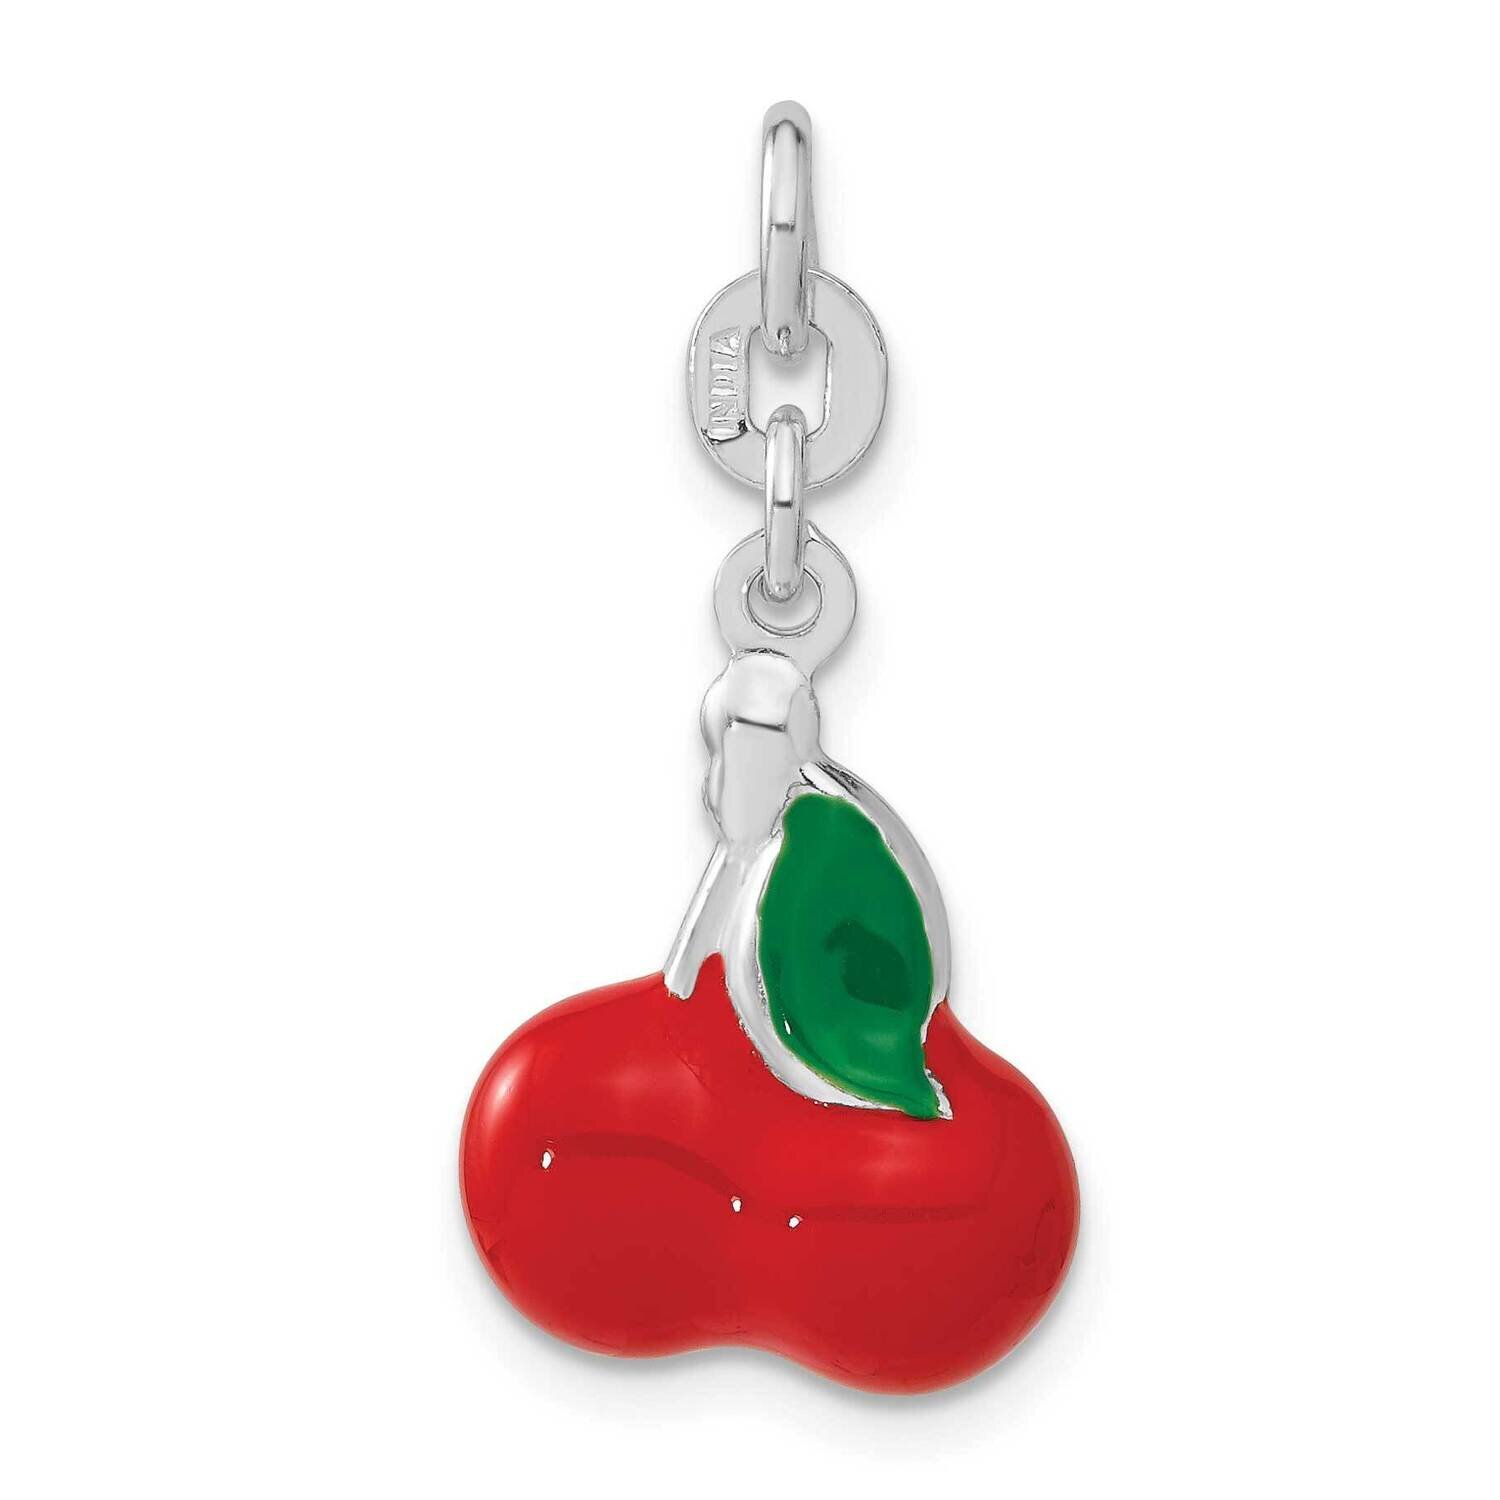 3-D Polished Enameled Cherries Charm Sterling Silver QC6139